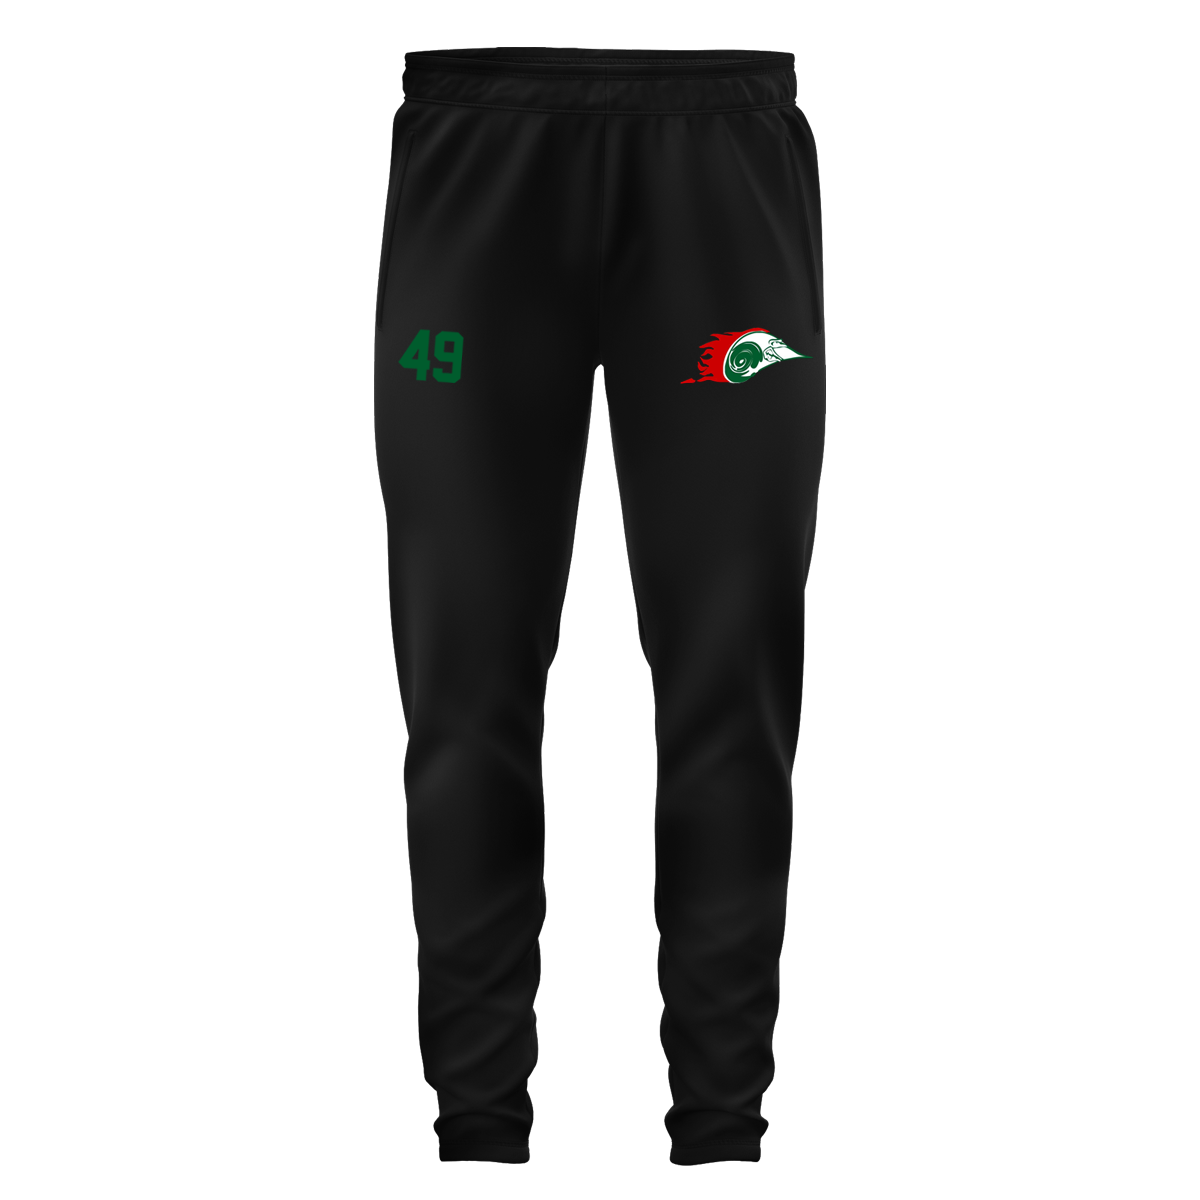 X-Press Skinny Pant with Playernumber/Initials